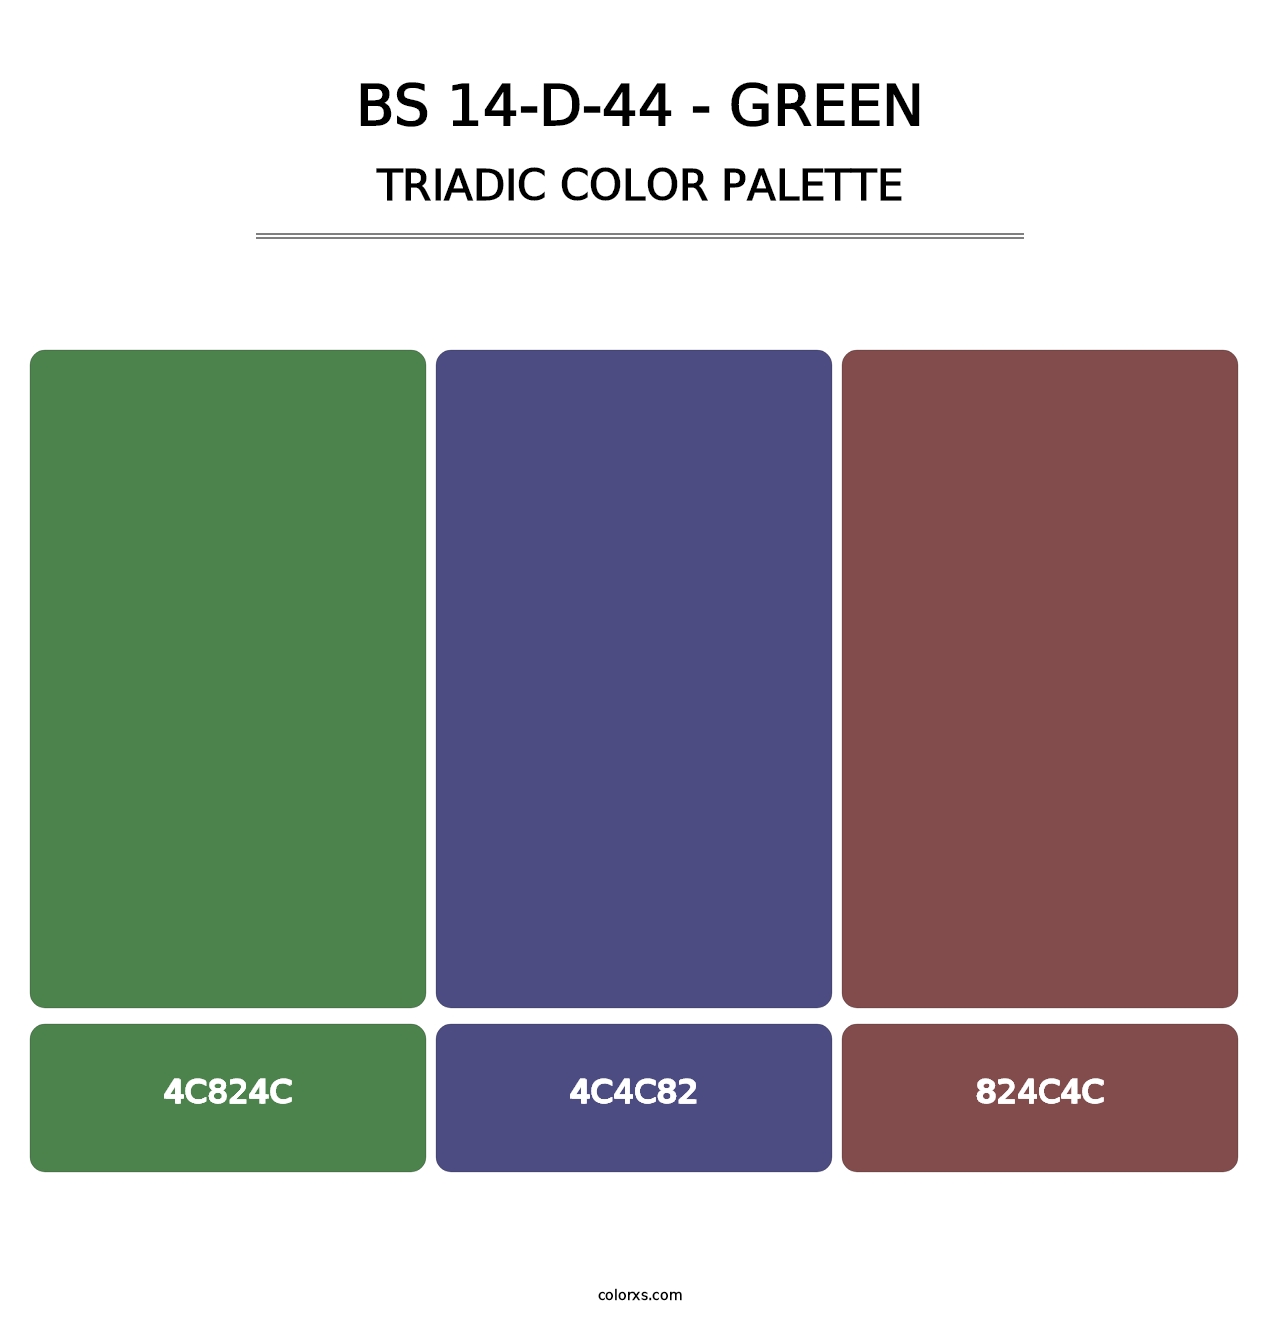 BS 14-D-44 - Green - Triadic Color Palette